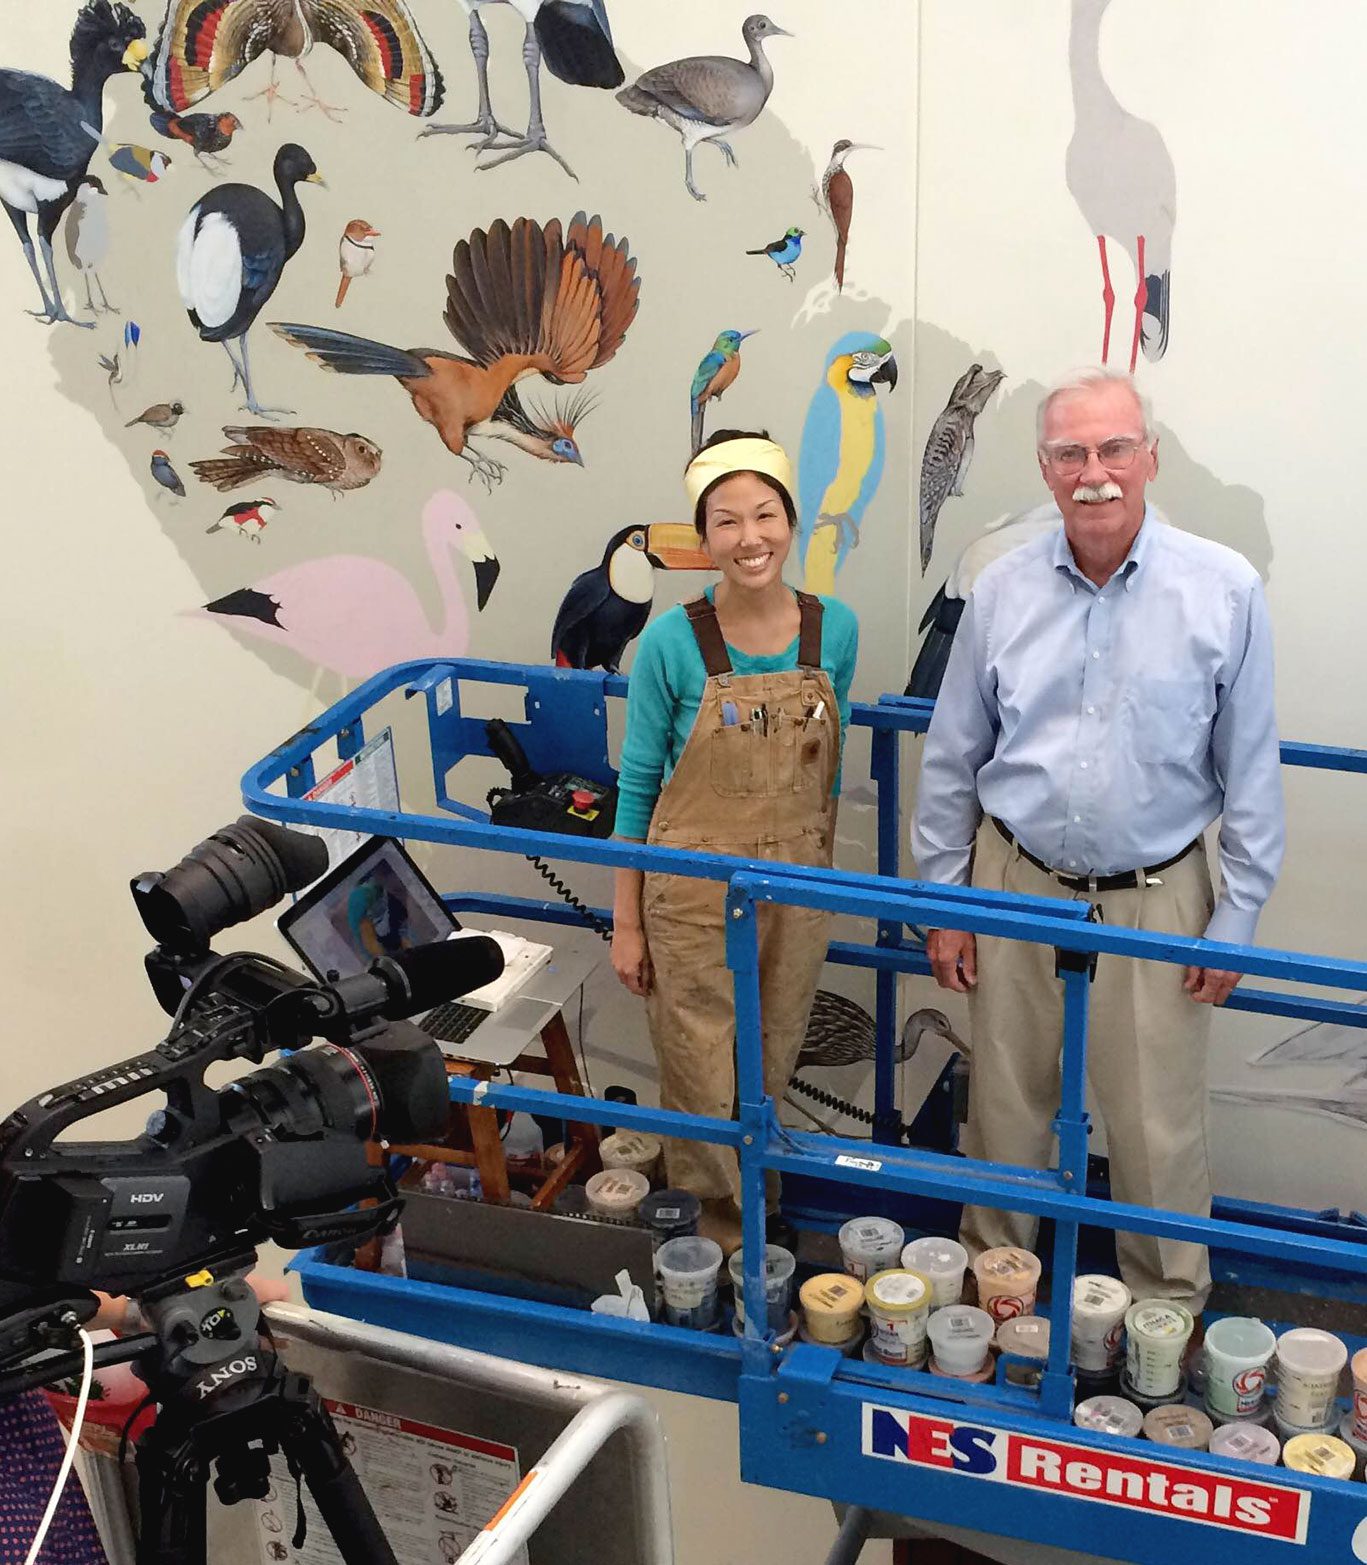 Fitzpatrick and Jane Kim at the Wall of Birds, 2016.